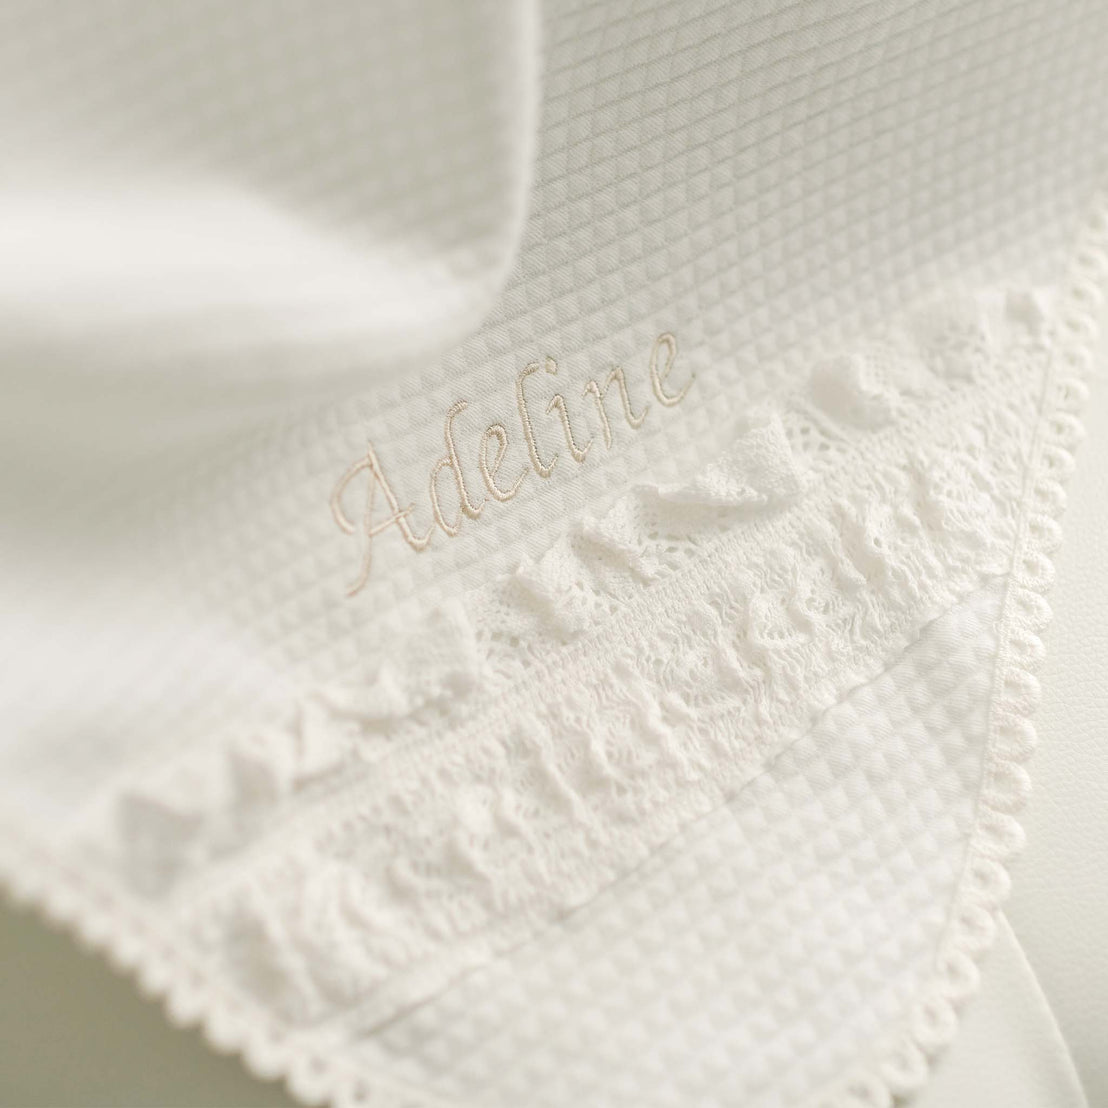 Alternate photo of the Adeline baptism blanket, with name personally embroidered in corner.